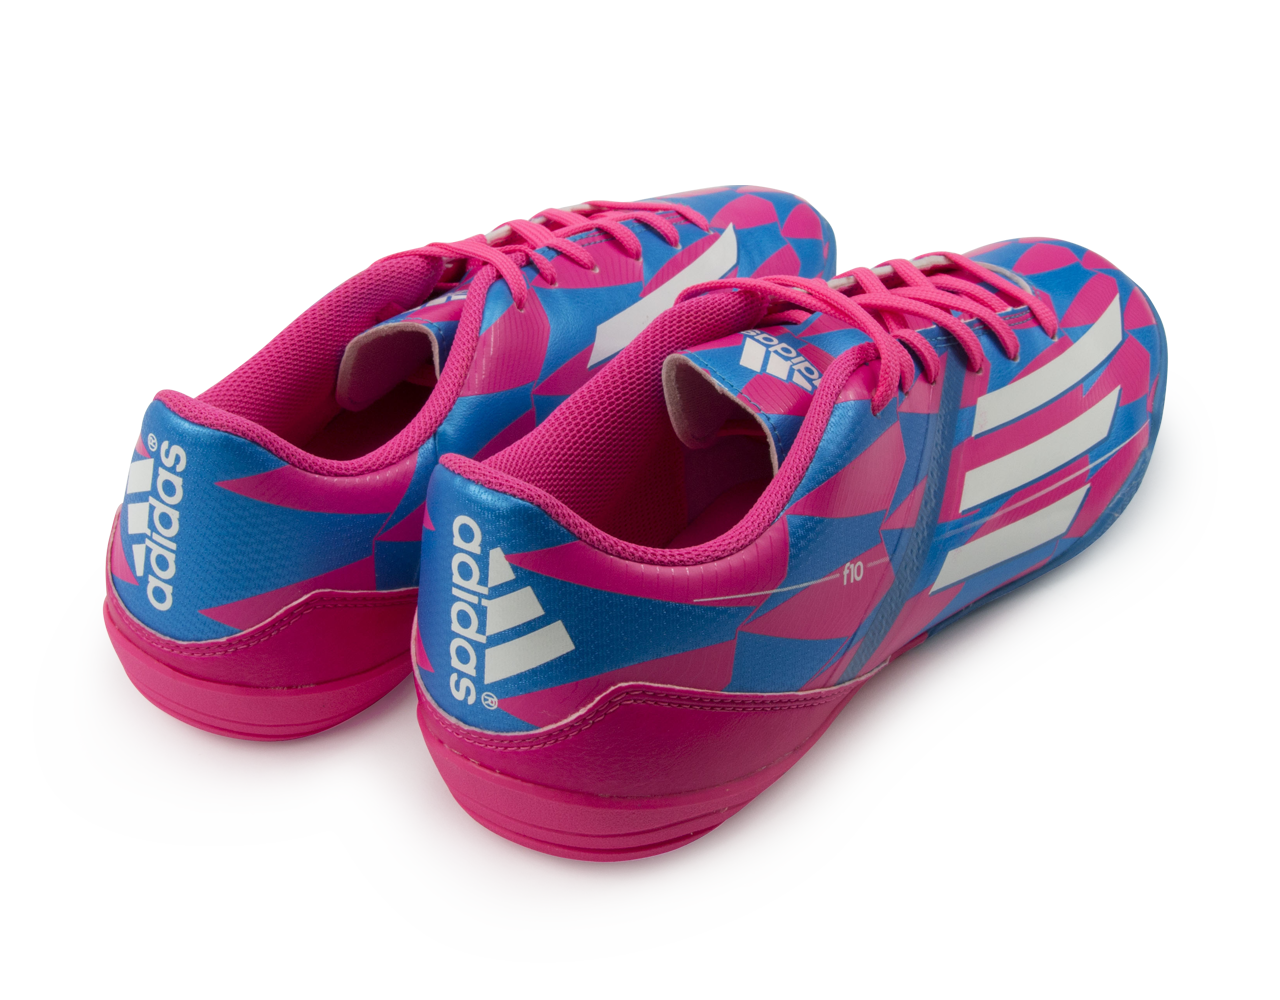 Adidas Men's F10 (Messi) Indoor Soccer Shoes Solar Pink/White/Solar Blue